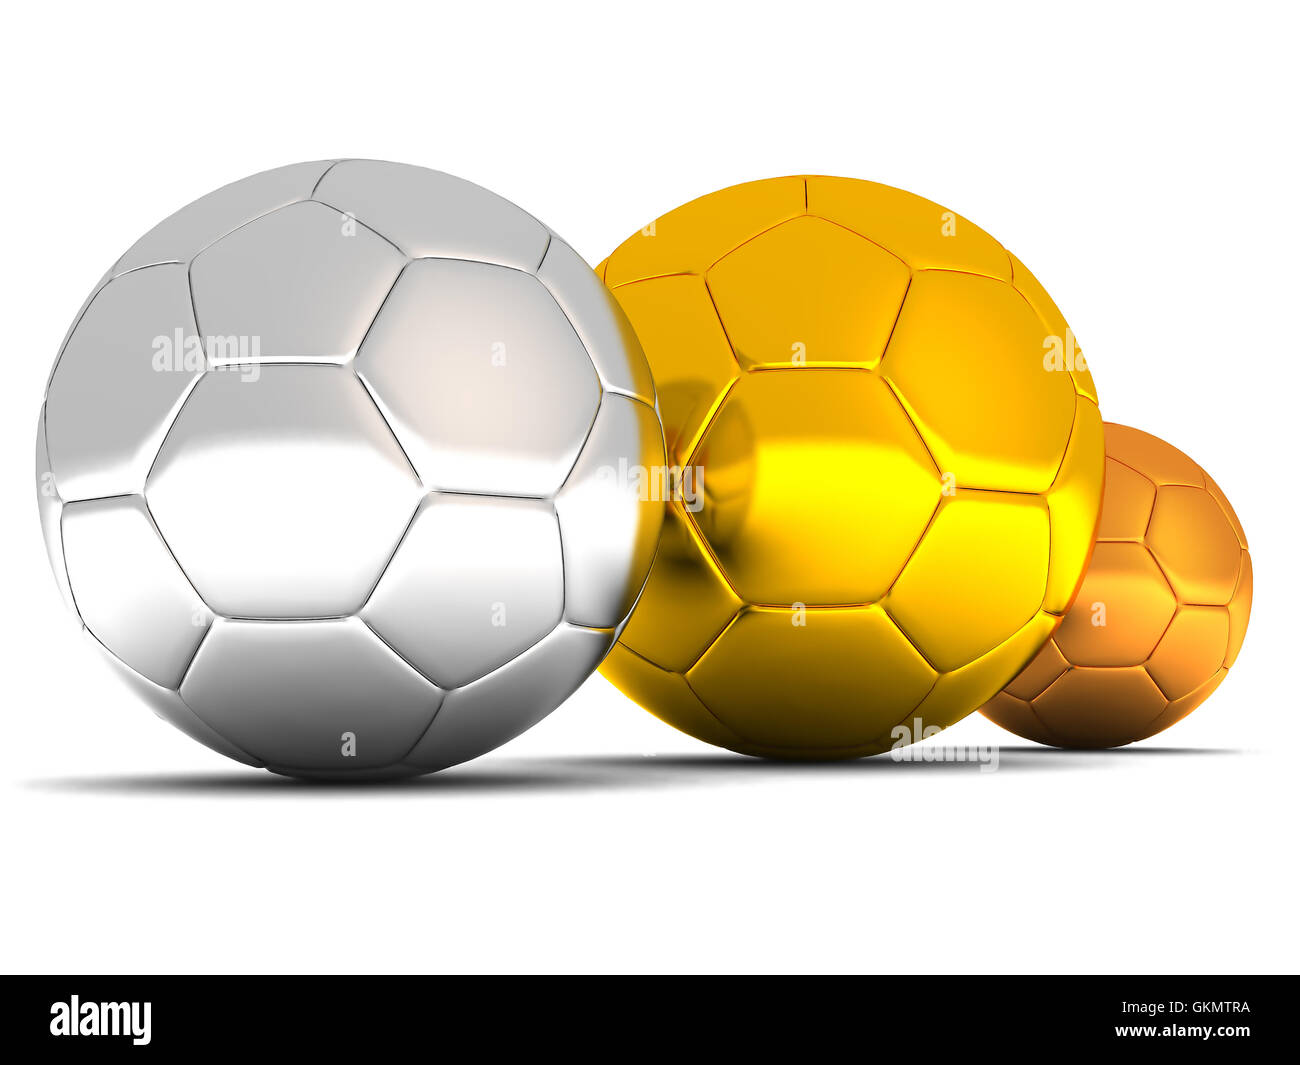 silver, gold and bronze soccer balls on white background Stock Photo